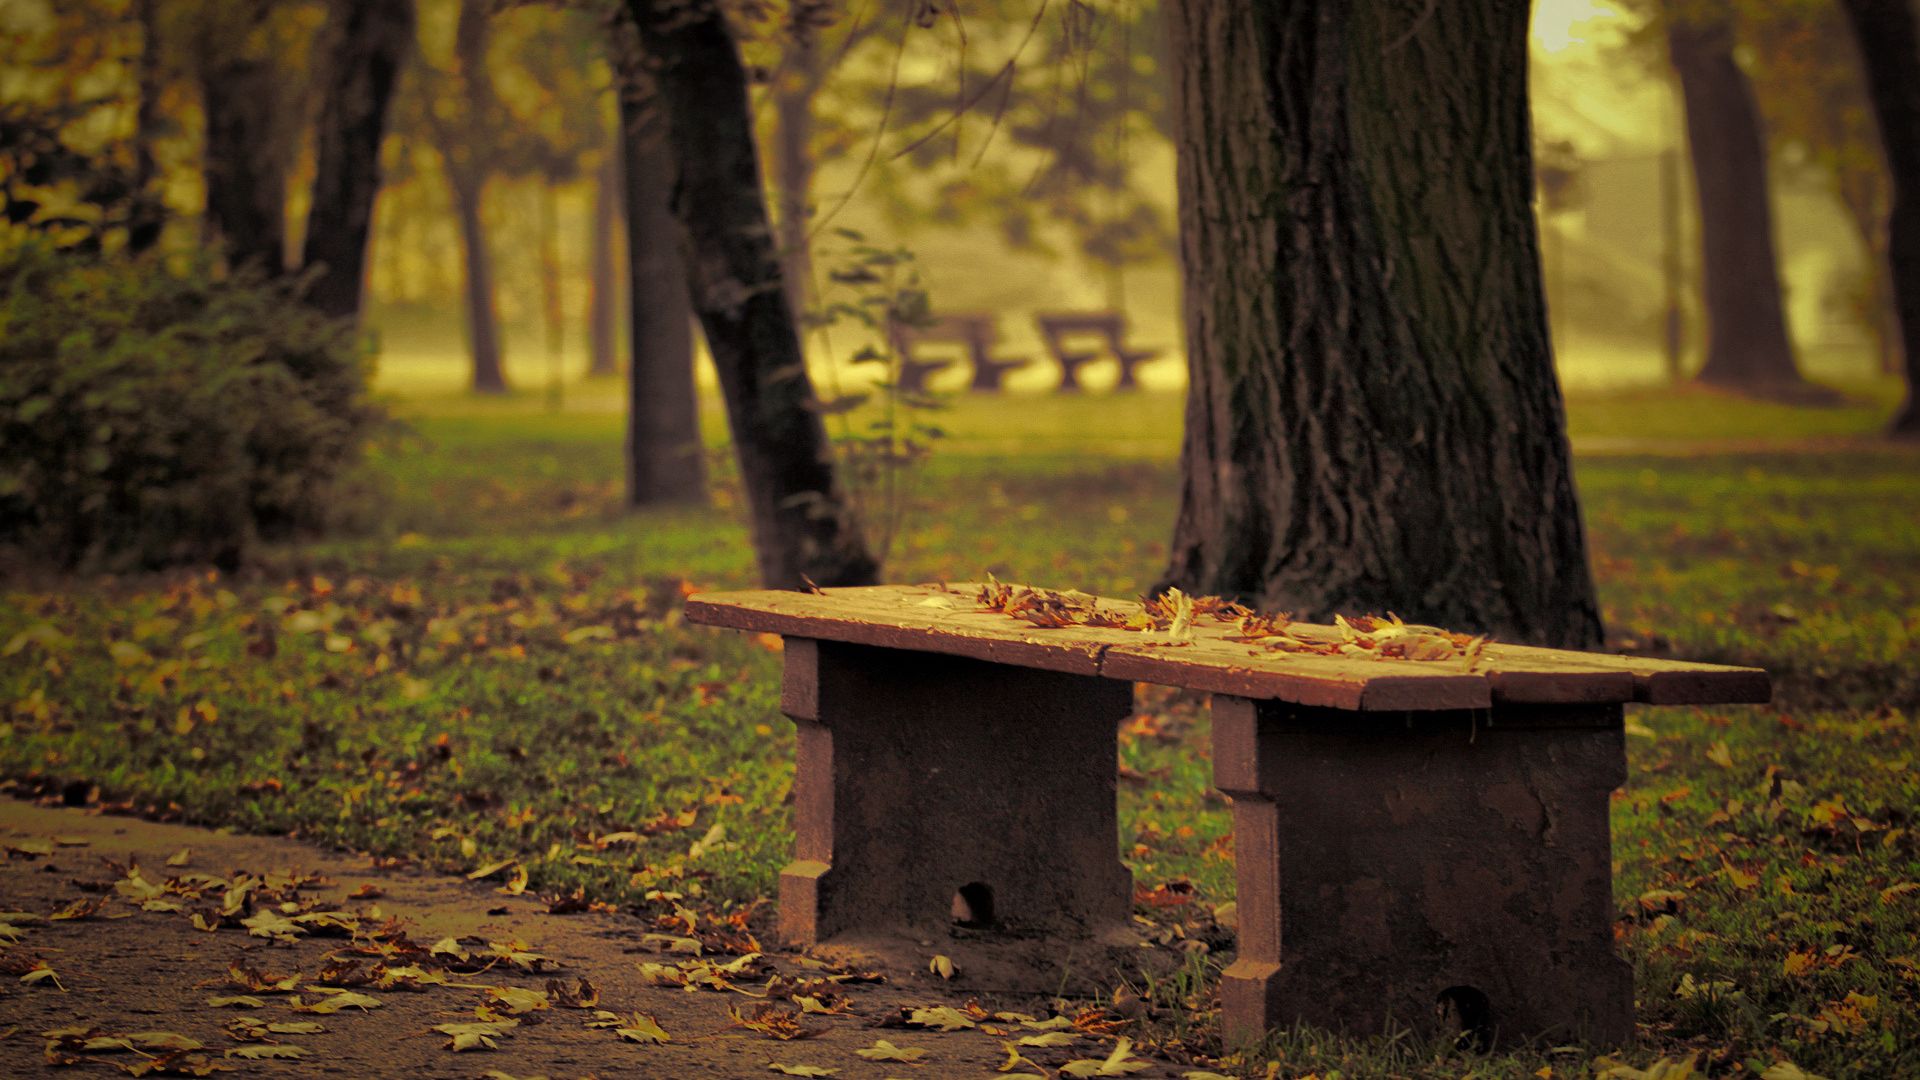 Download wallpaper 1920x1080 bench, park, leaves, autumn, trees, loneliness  full hd, hdtv, fhd, 1080p hd background